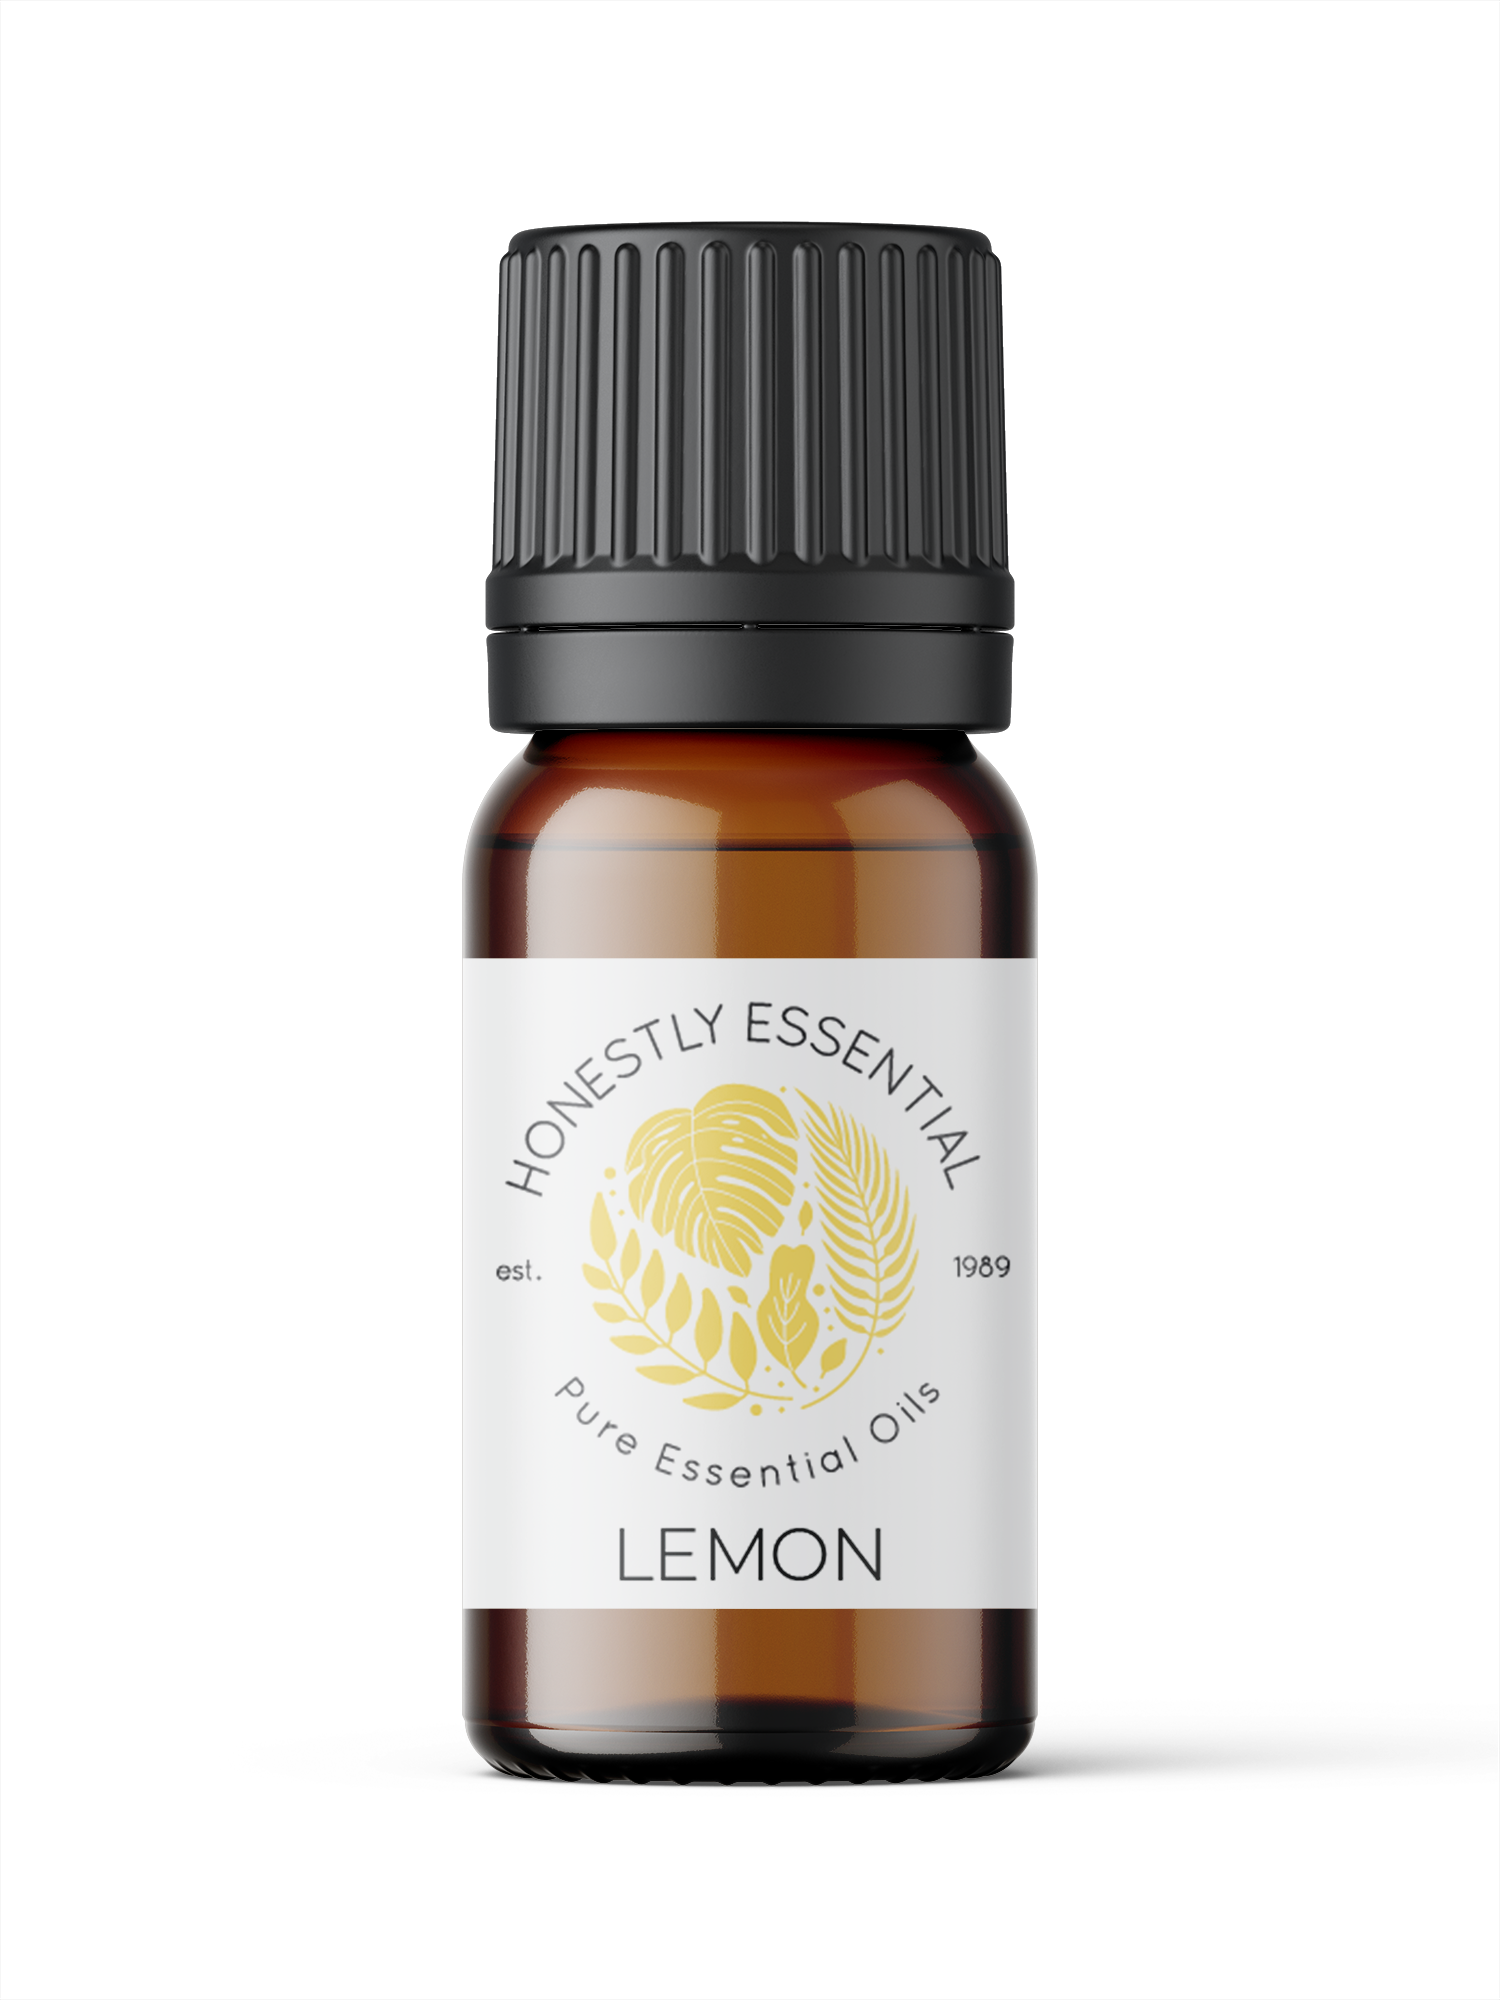 Lemon Essential Oil - Essential Oils | Honestly Essential Oils bruising, citrus, citrus essential oil, digestion, Insect and Pest Repellent, kid safe, skin, skin health, sores, wounds